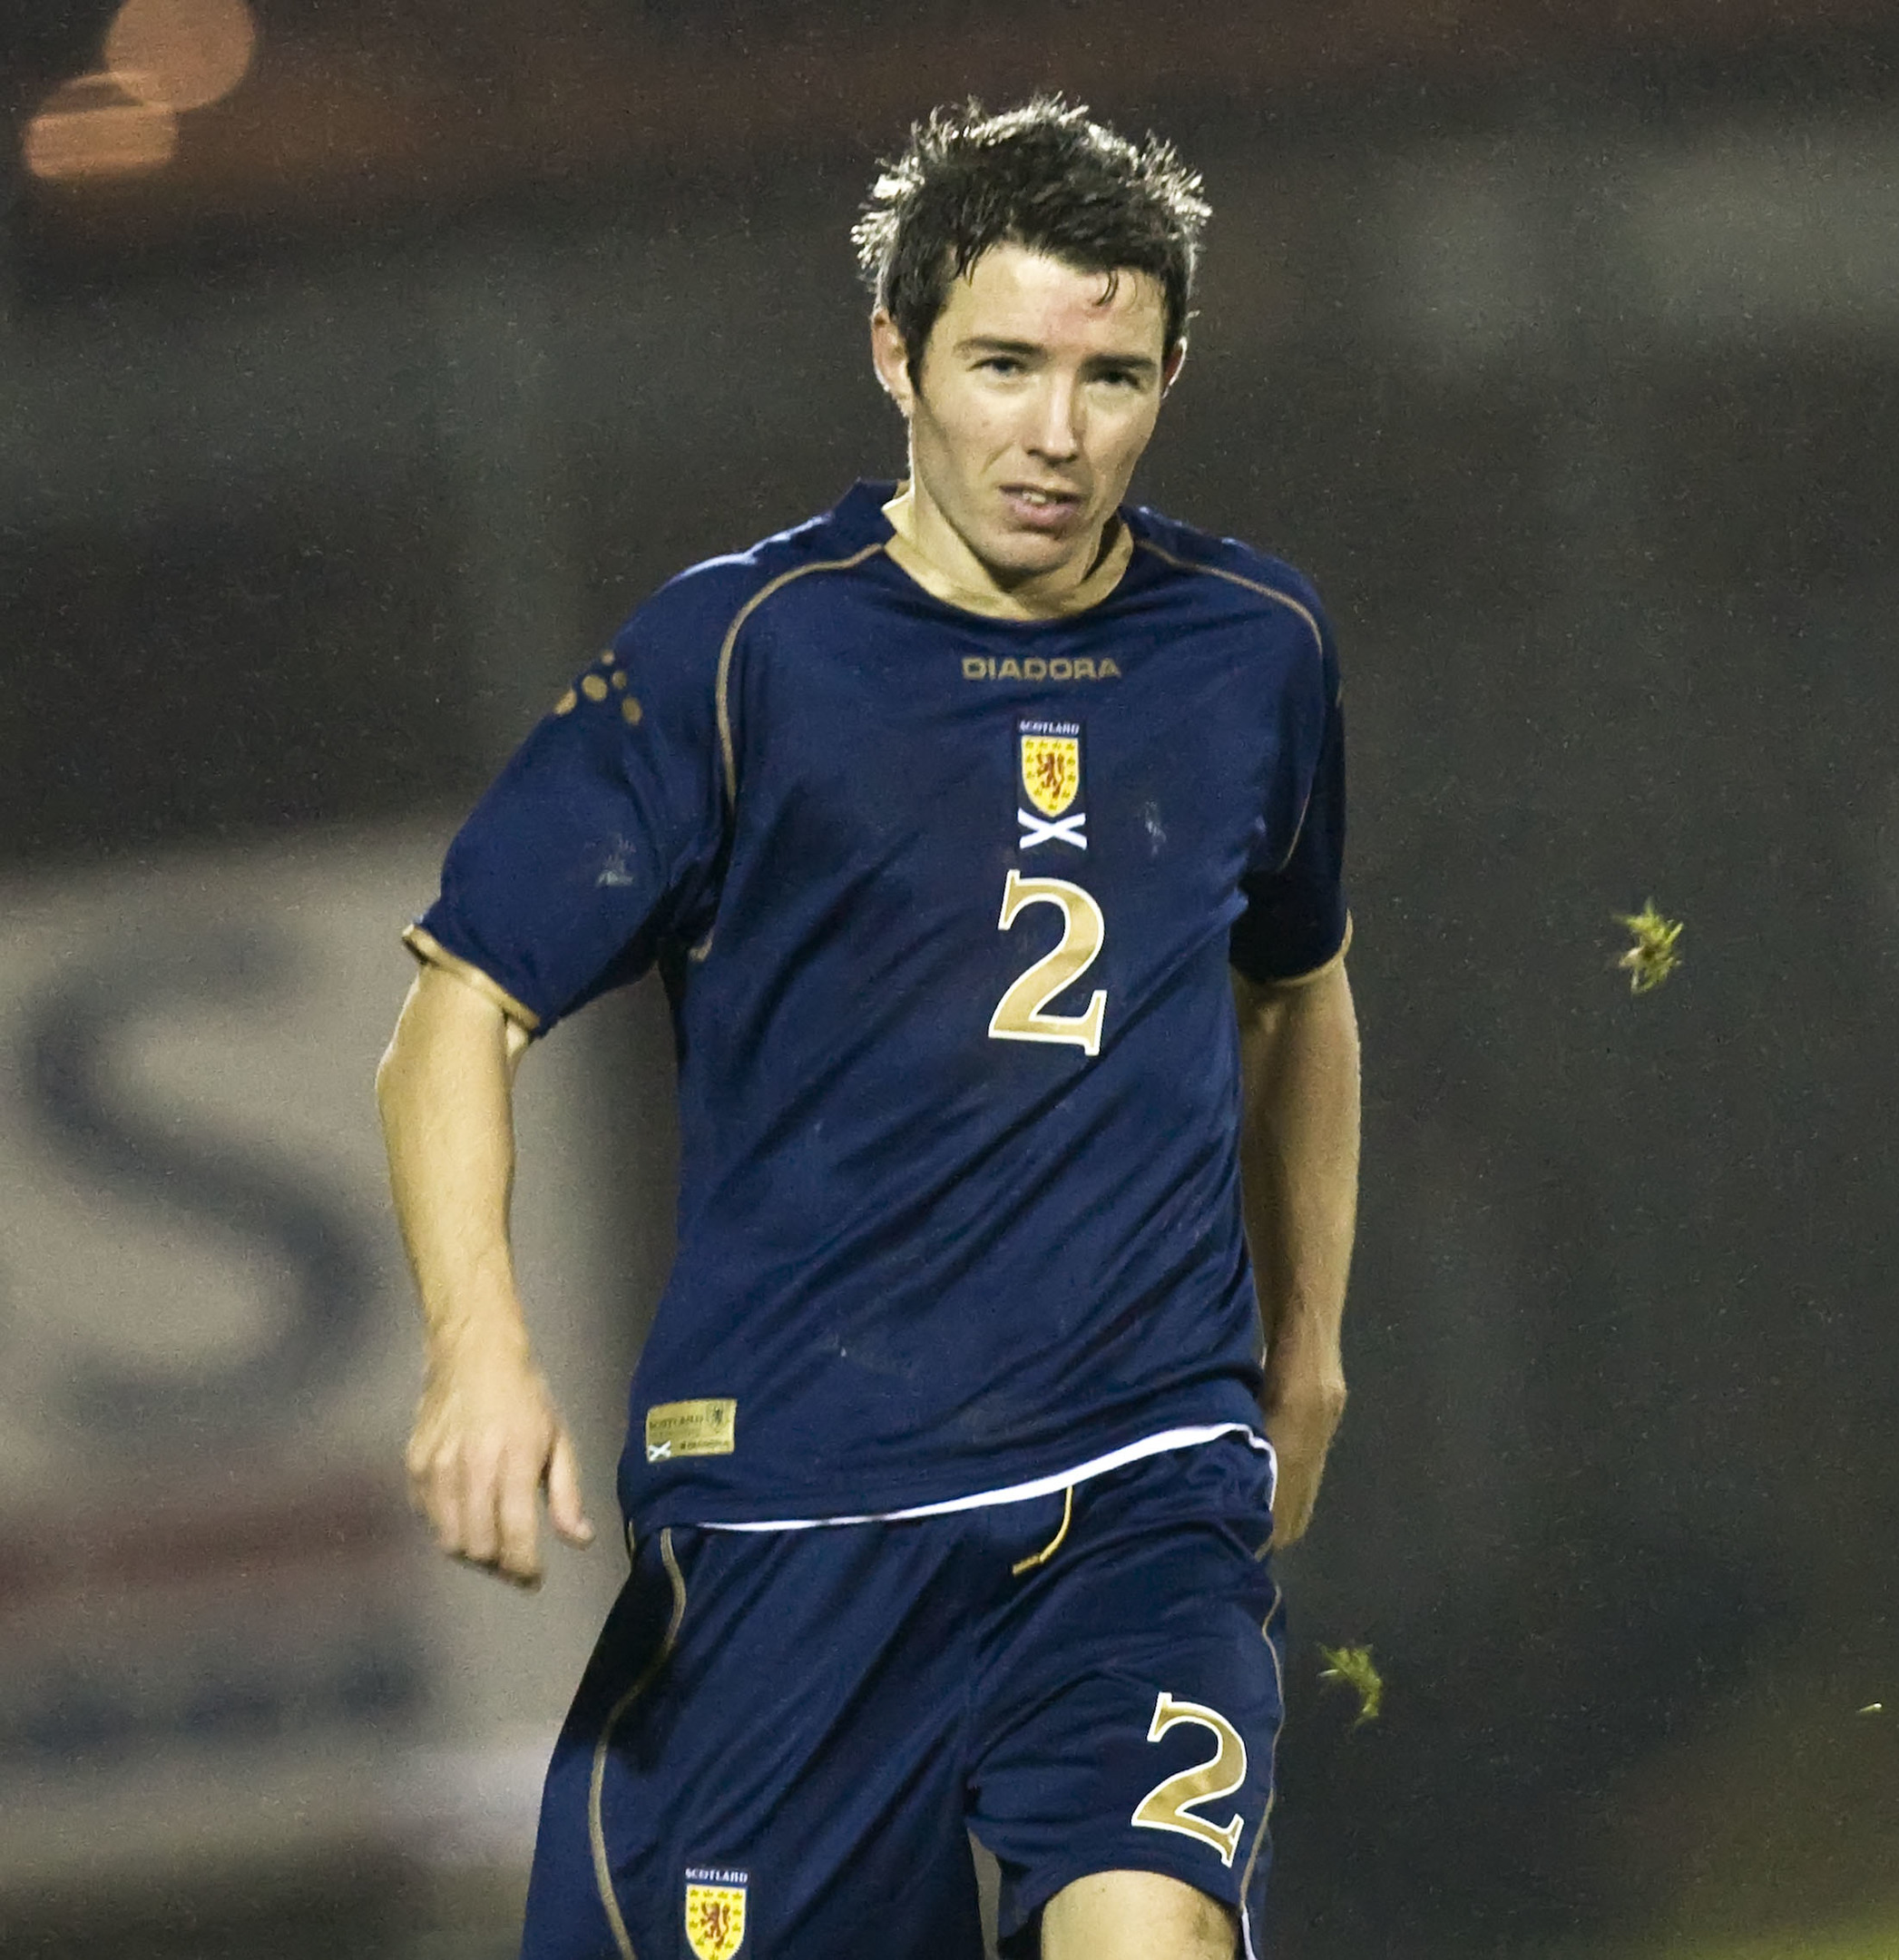 Kevin McNaughton made four appearances for the national side.